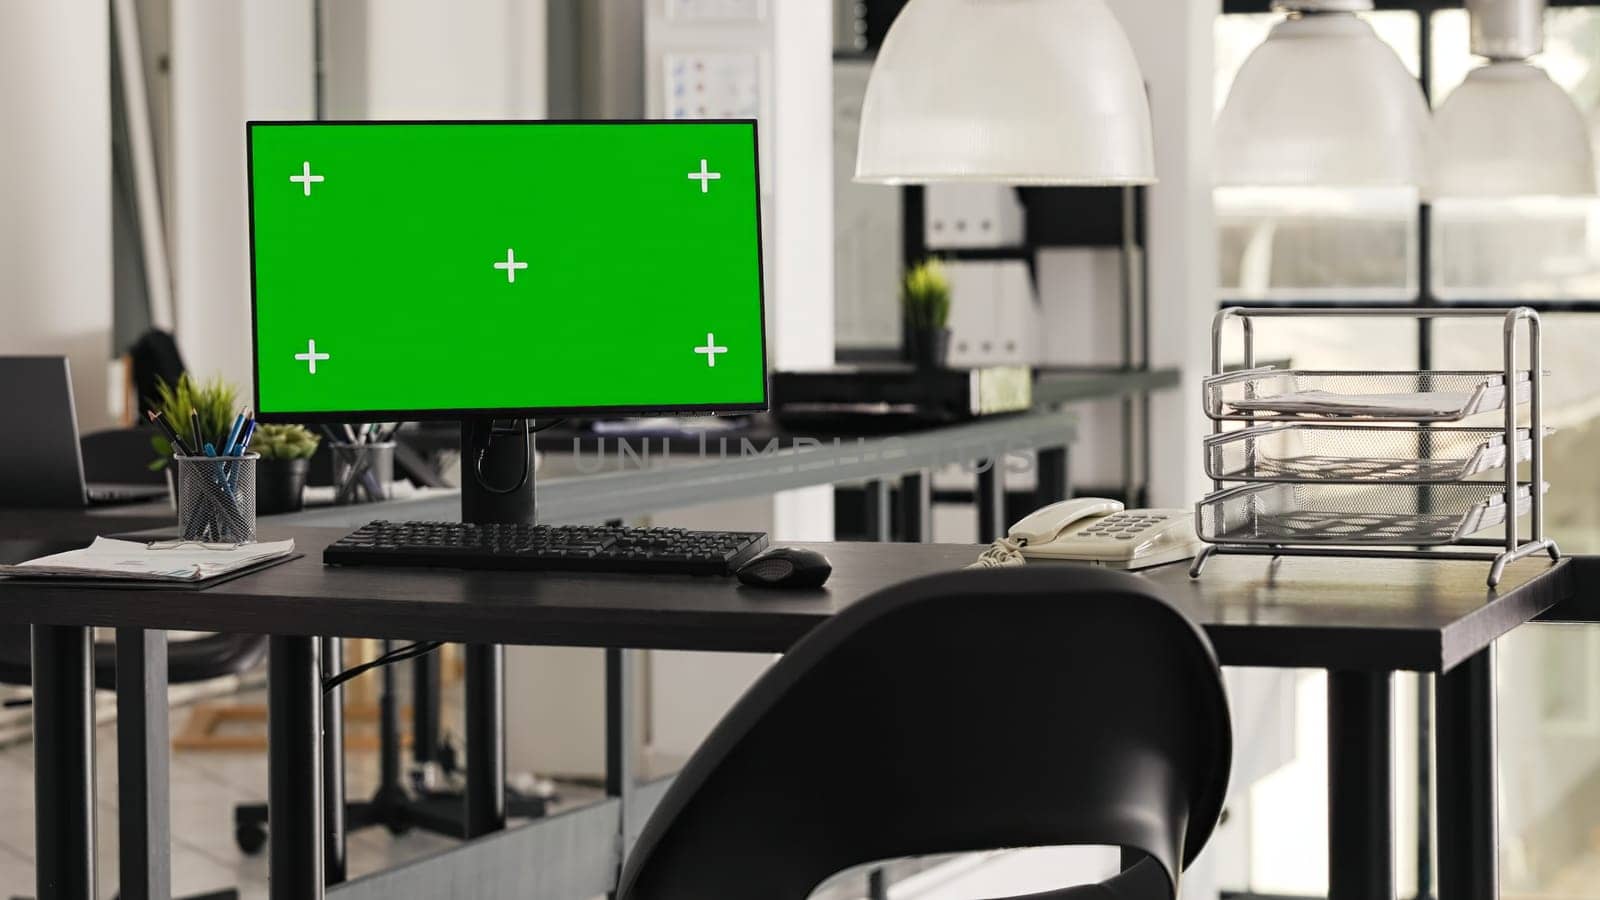 Greenscreen display placed on desk by DCStudio